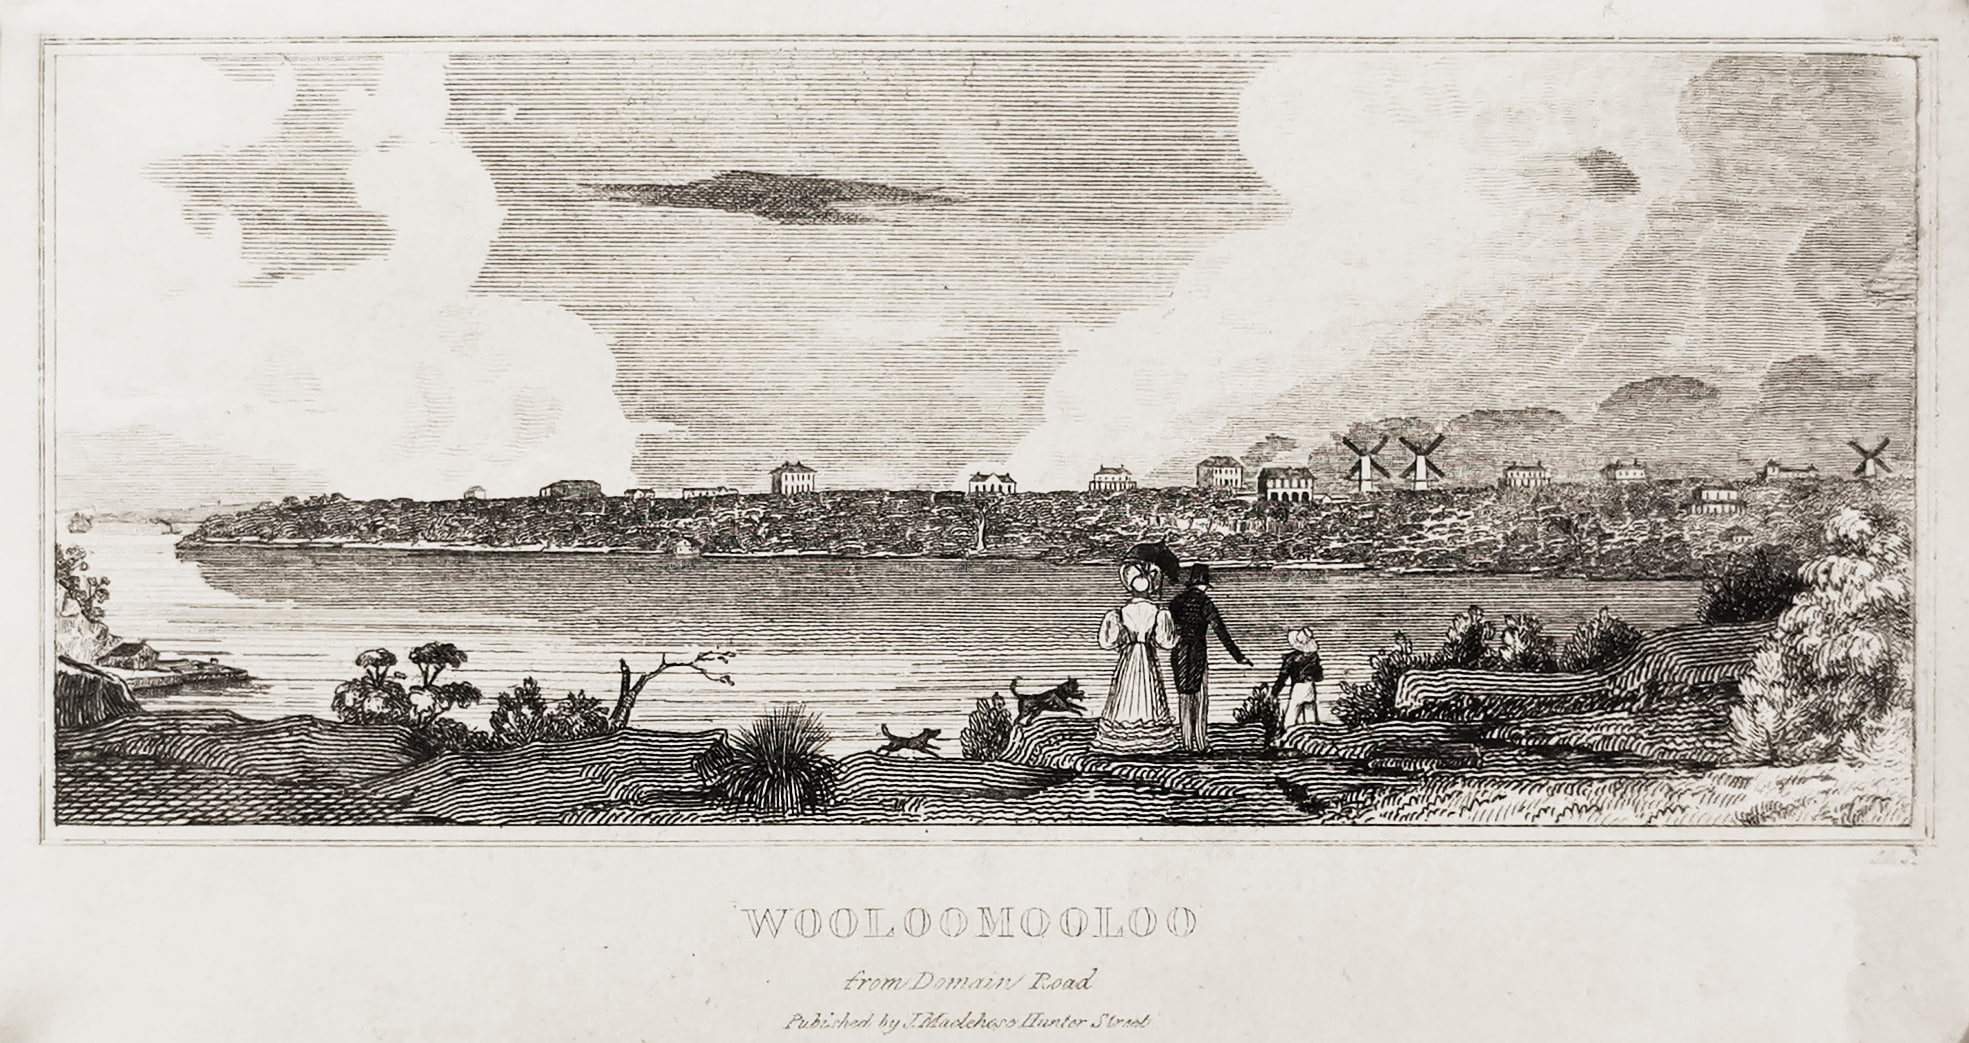 Wooloomooloo from Domain Road - Antique View from 1839